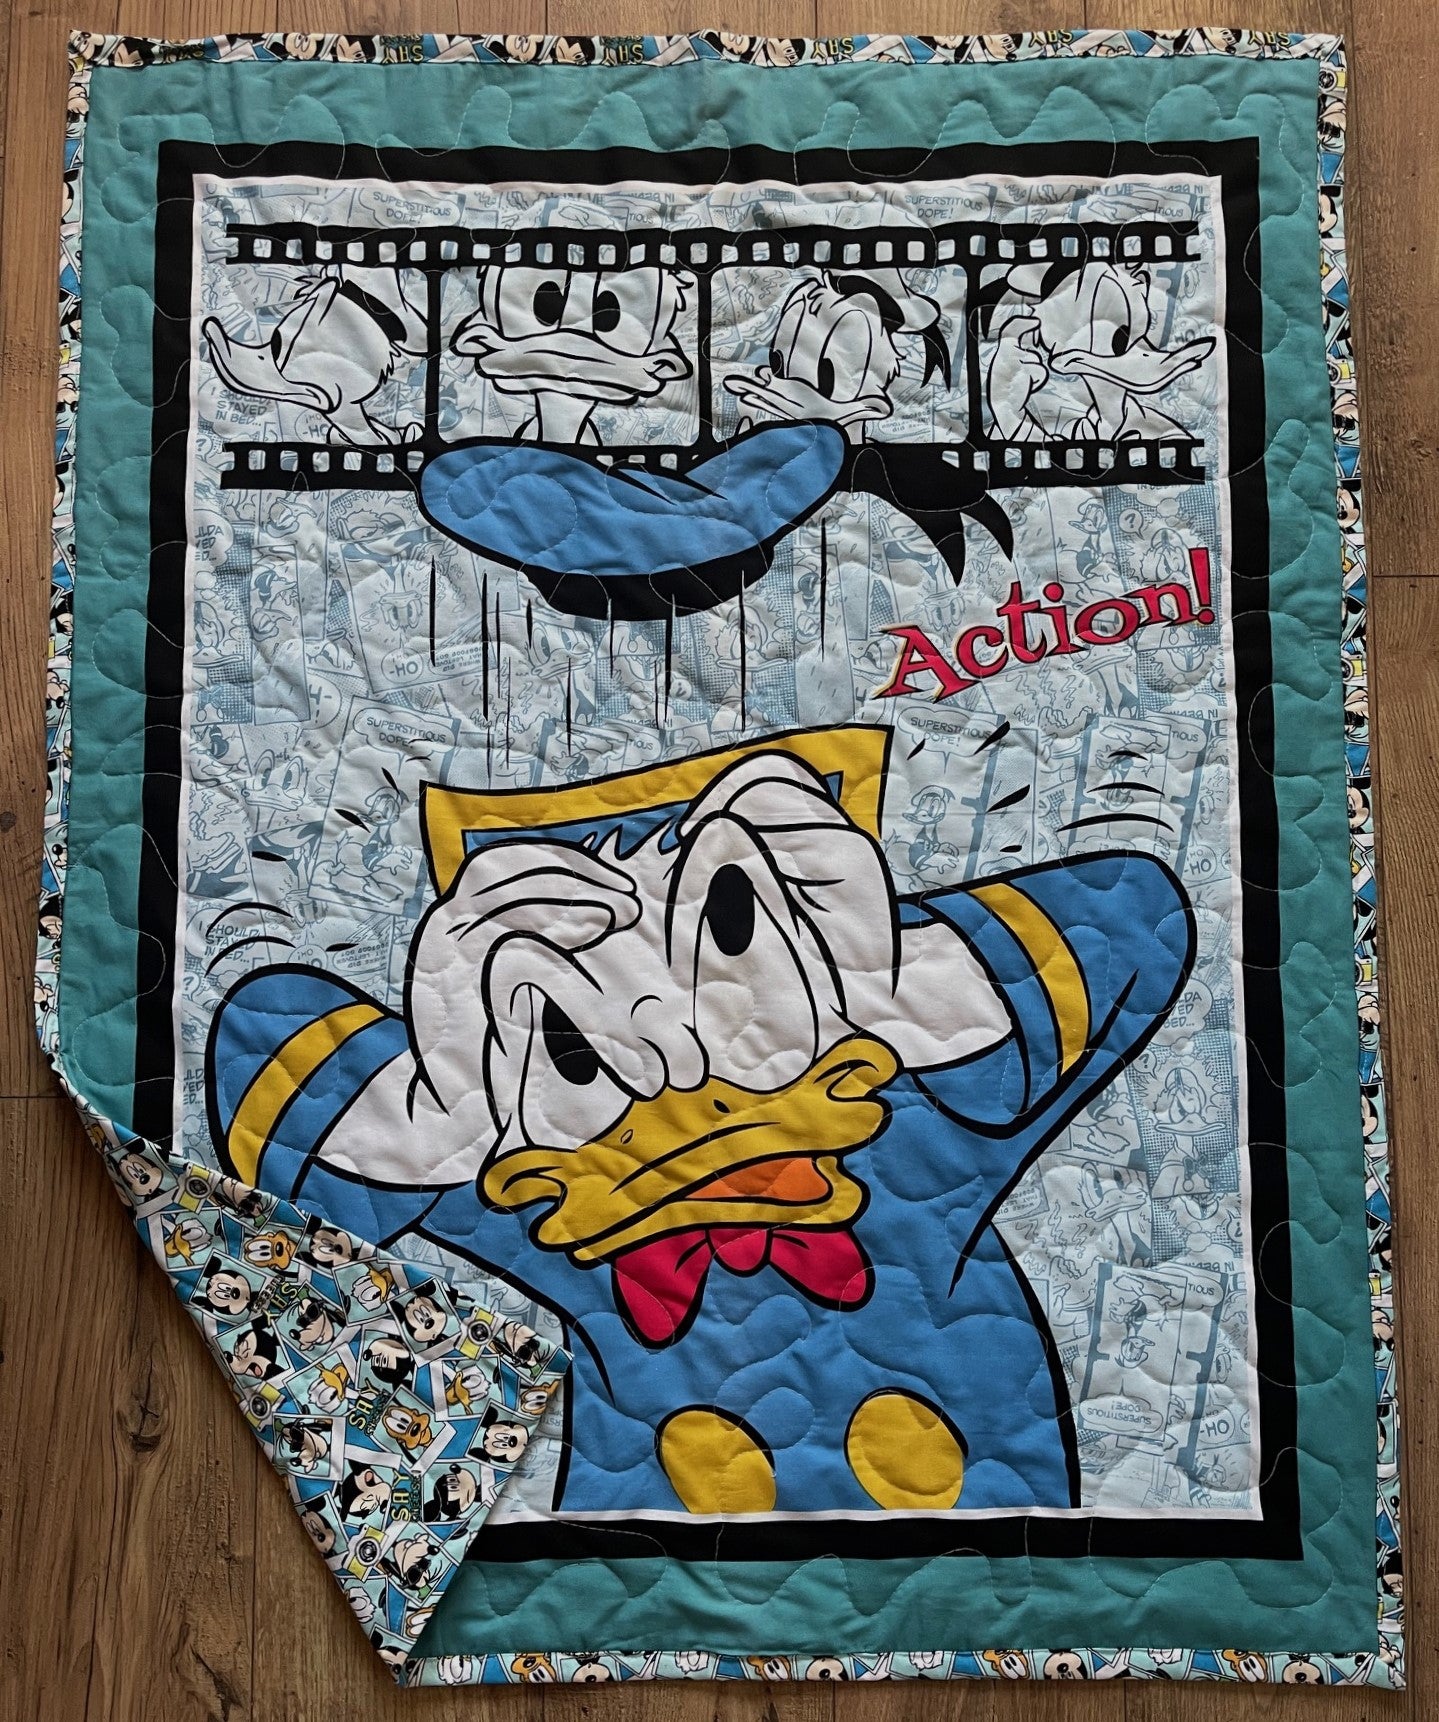 DISNEY DONALD DUCK "ACTION" MICKEY MOUSE, PLUTO & GOOFY INSPIRED QUILTED BLANKET